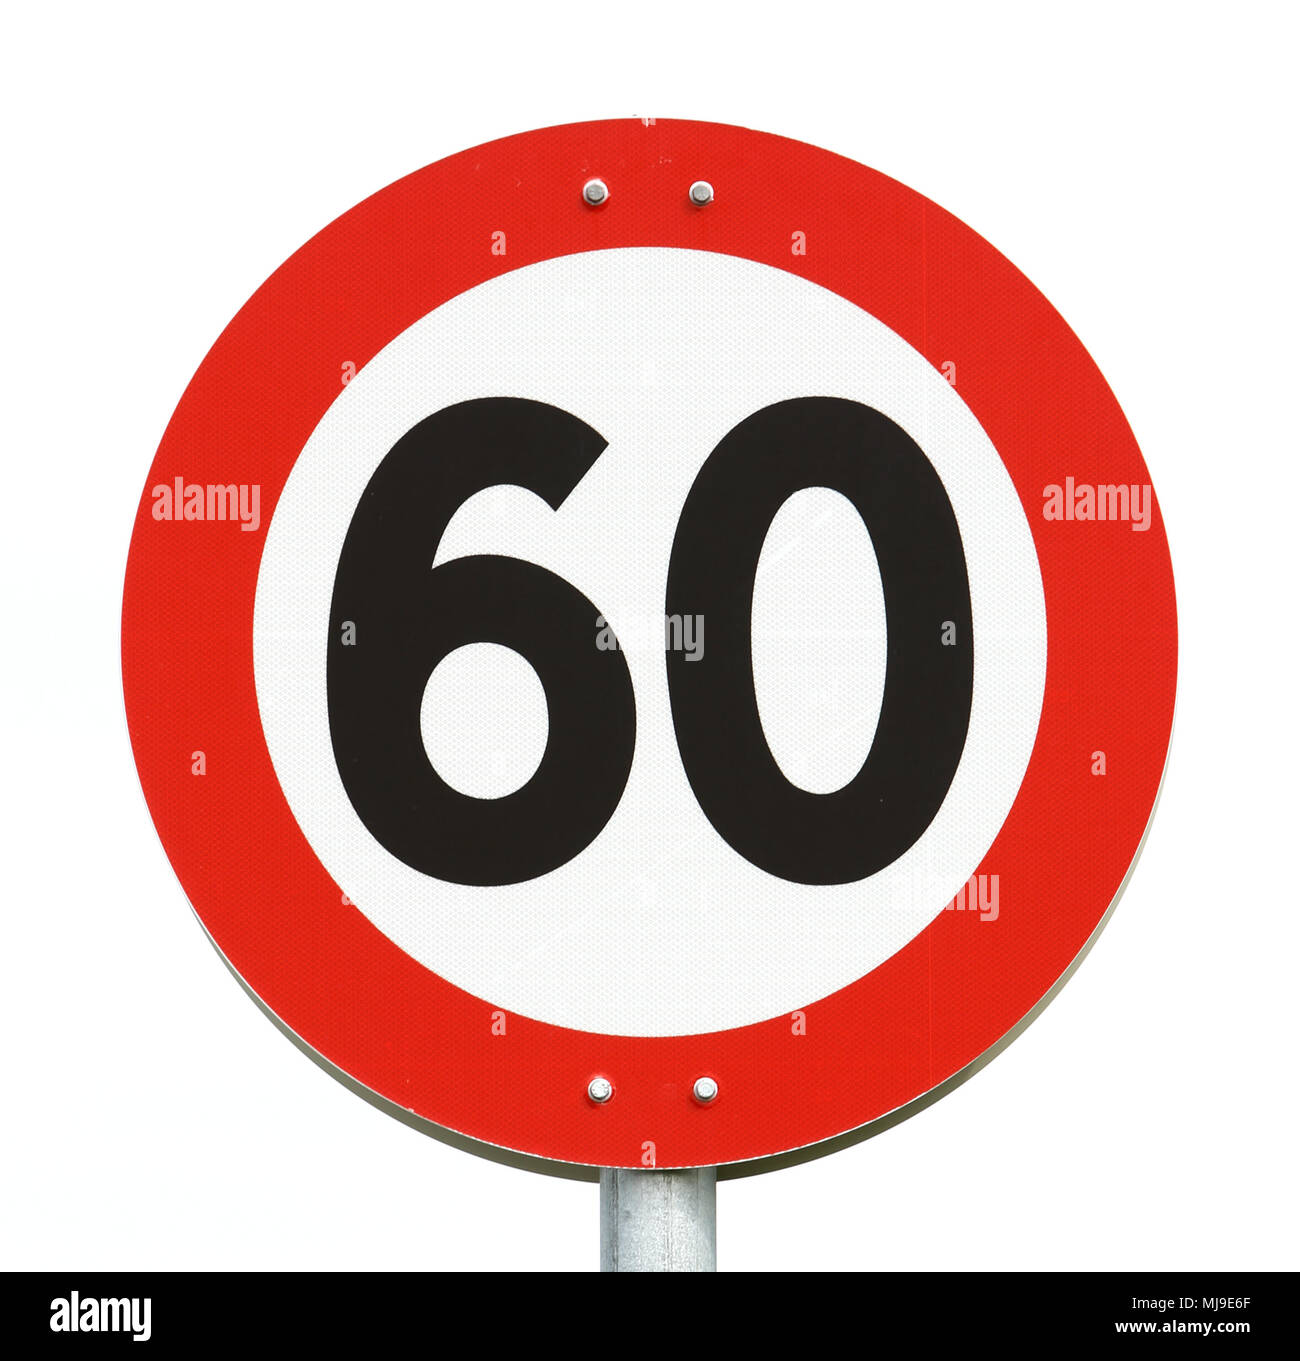 Road sign speed limit 60 isolated on white. Stock Photo